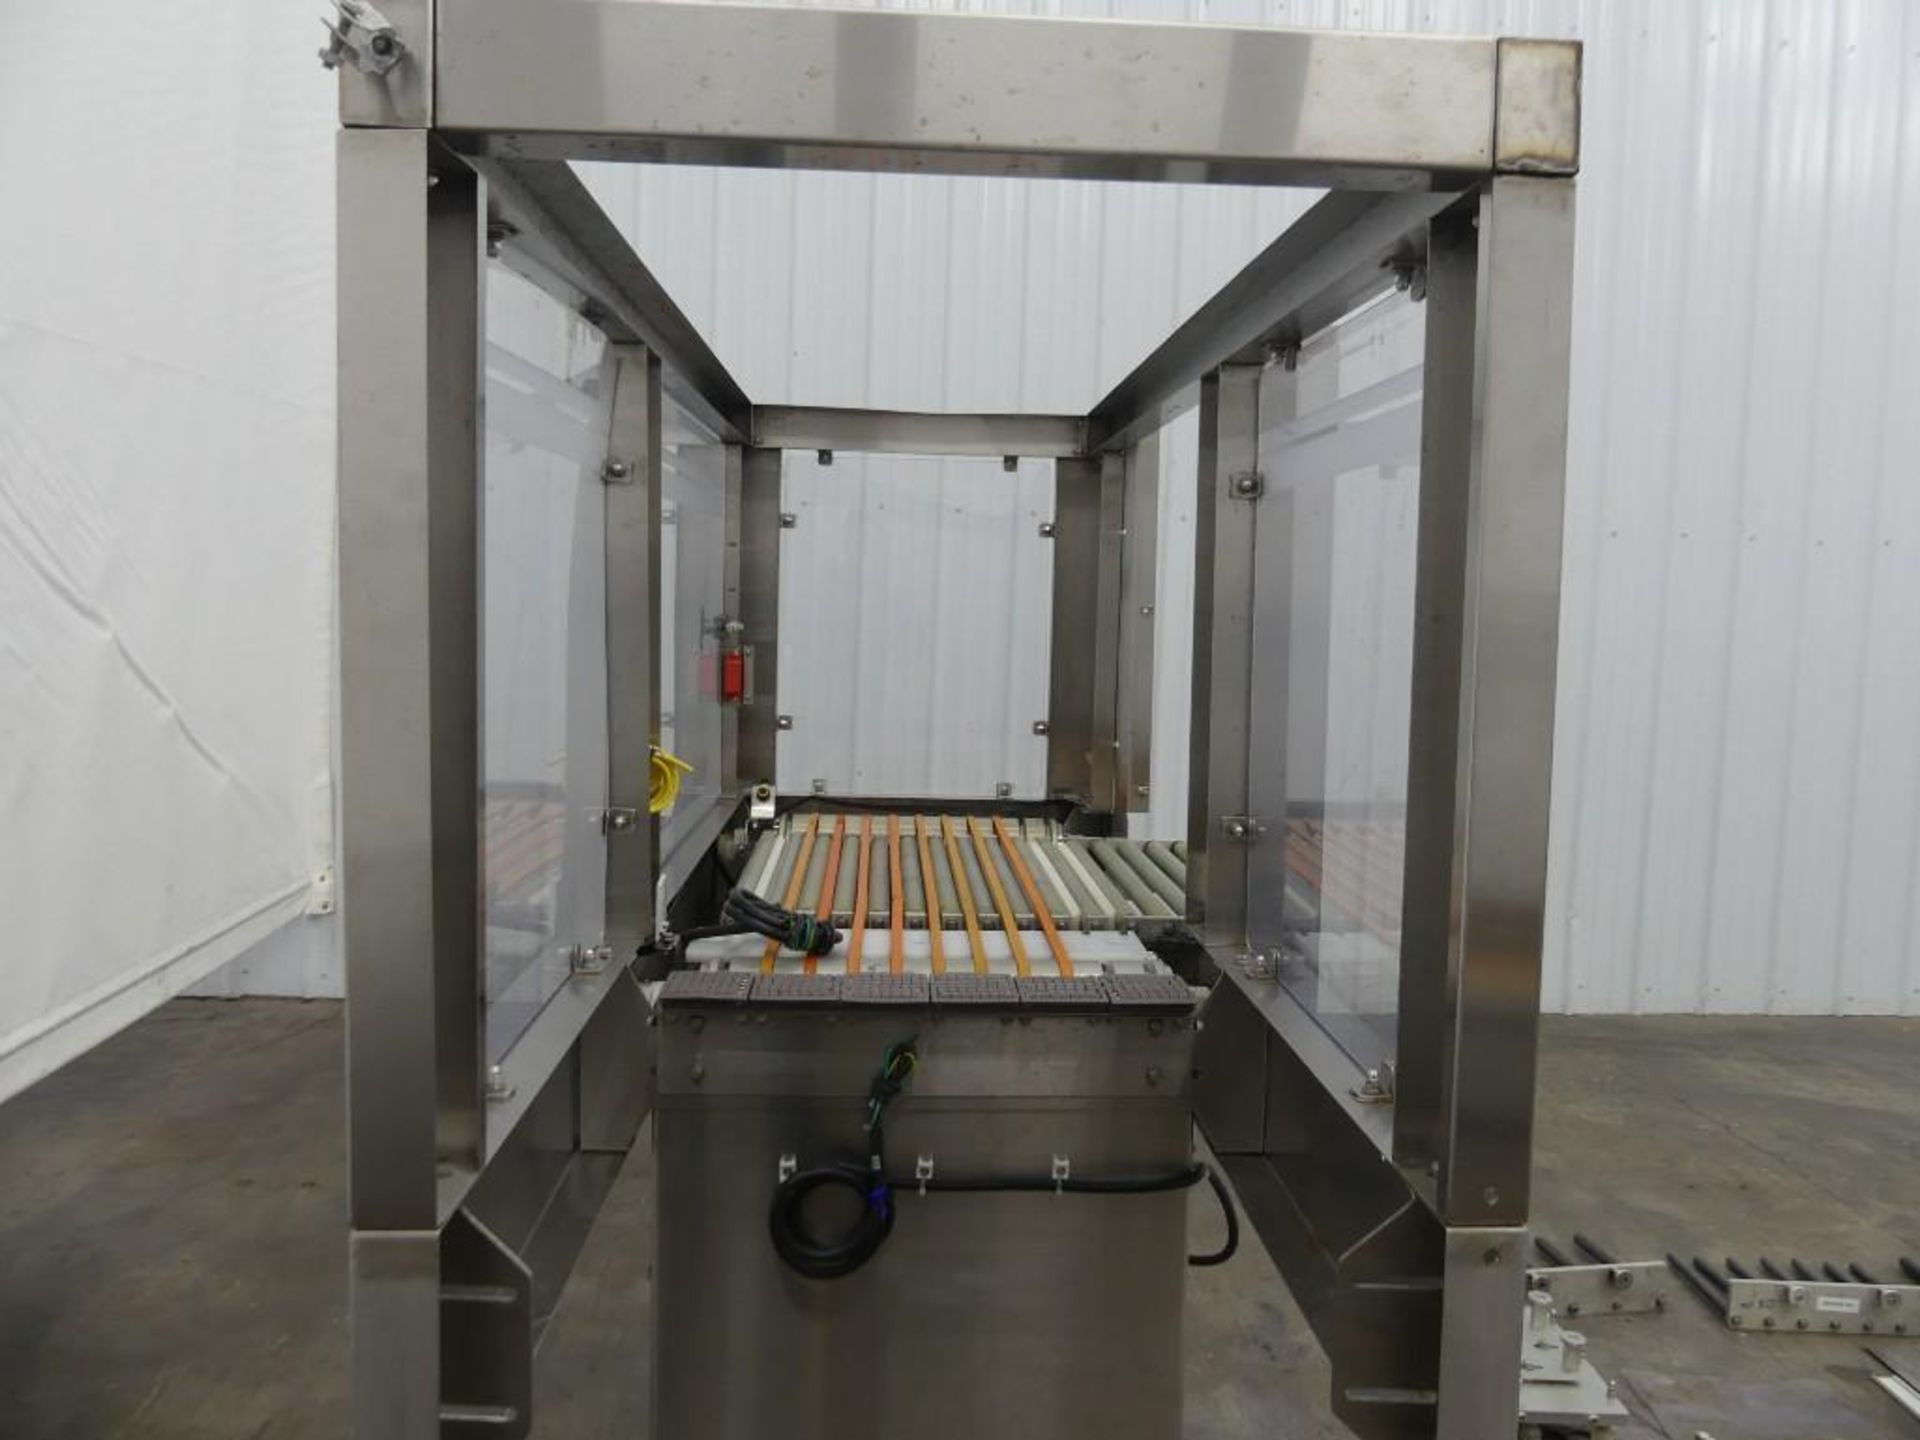 Arpac Delkor Spot-Pak 112-SS-24 Automatic Stainless Steel Shrink Bundler - Image 49 of 101